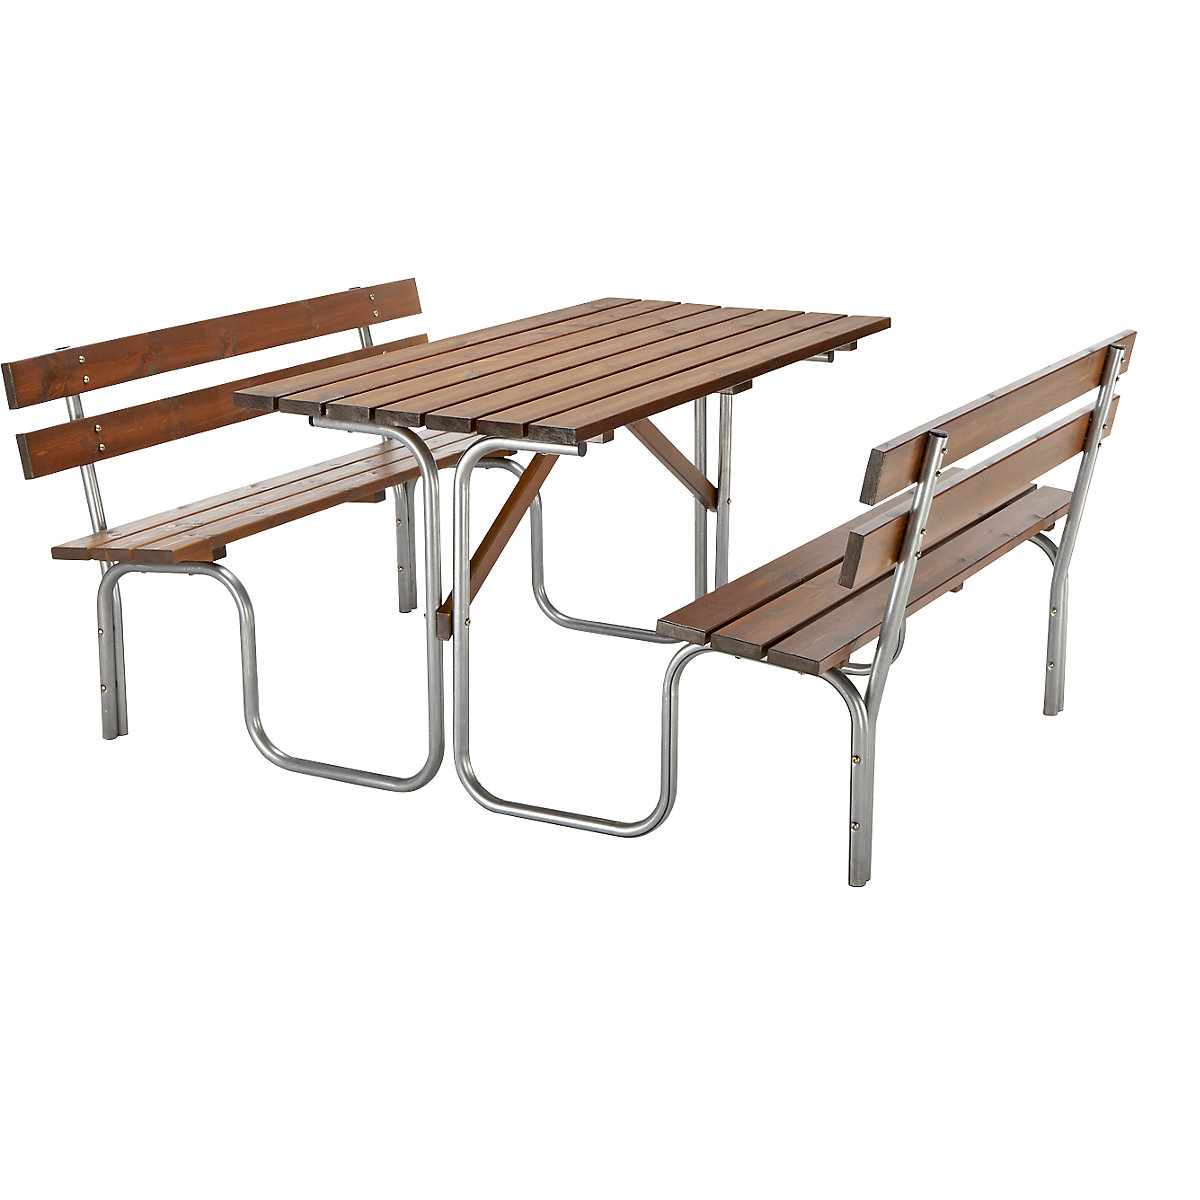 Picnic bench, table and 2 benches, brown, overall LxD 1500 x 1850 mm-5